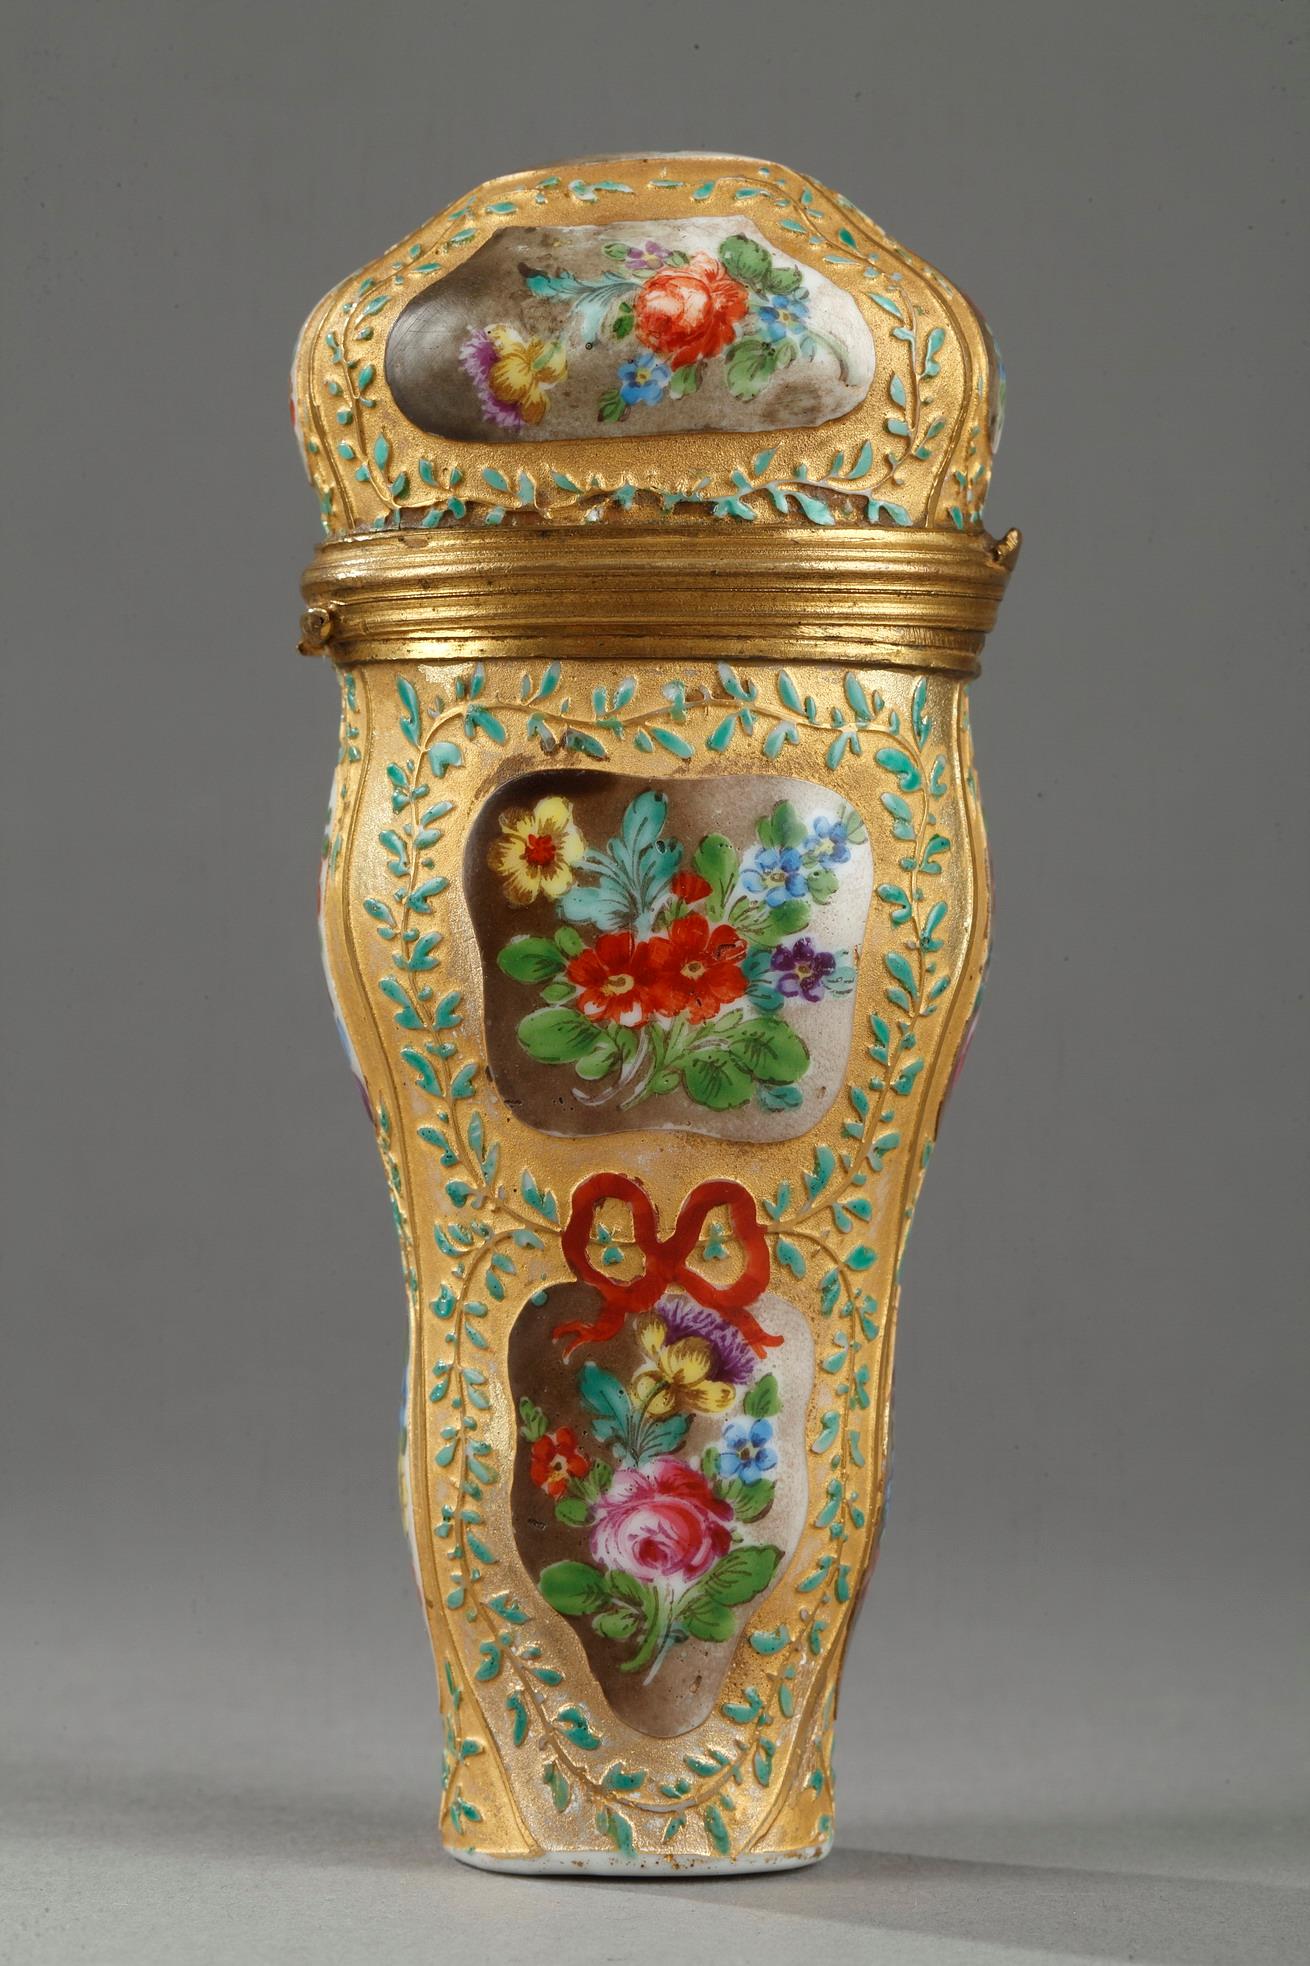 Early 19th Century German Porcelain Case.